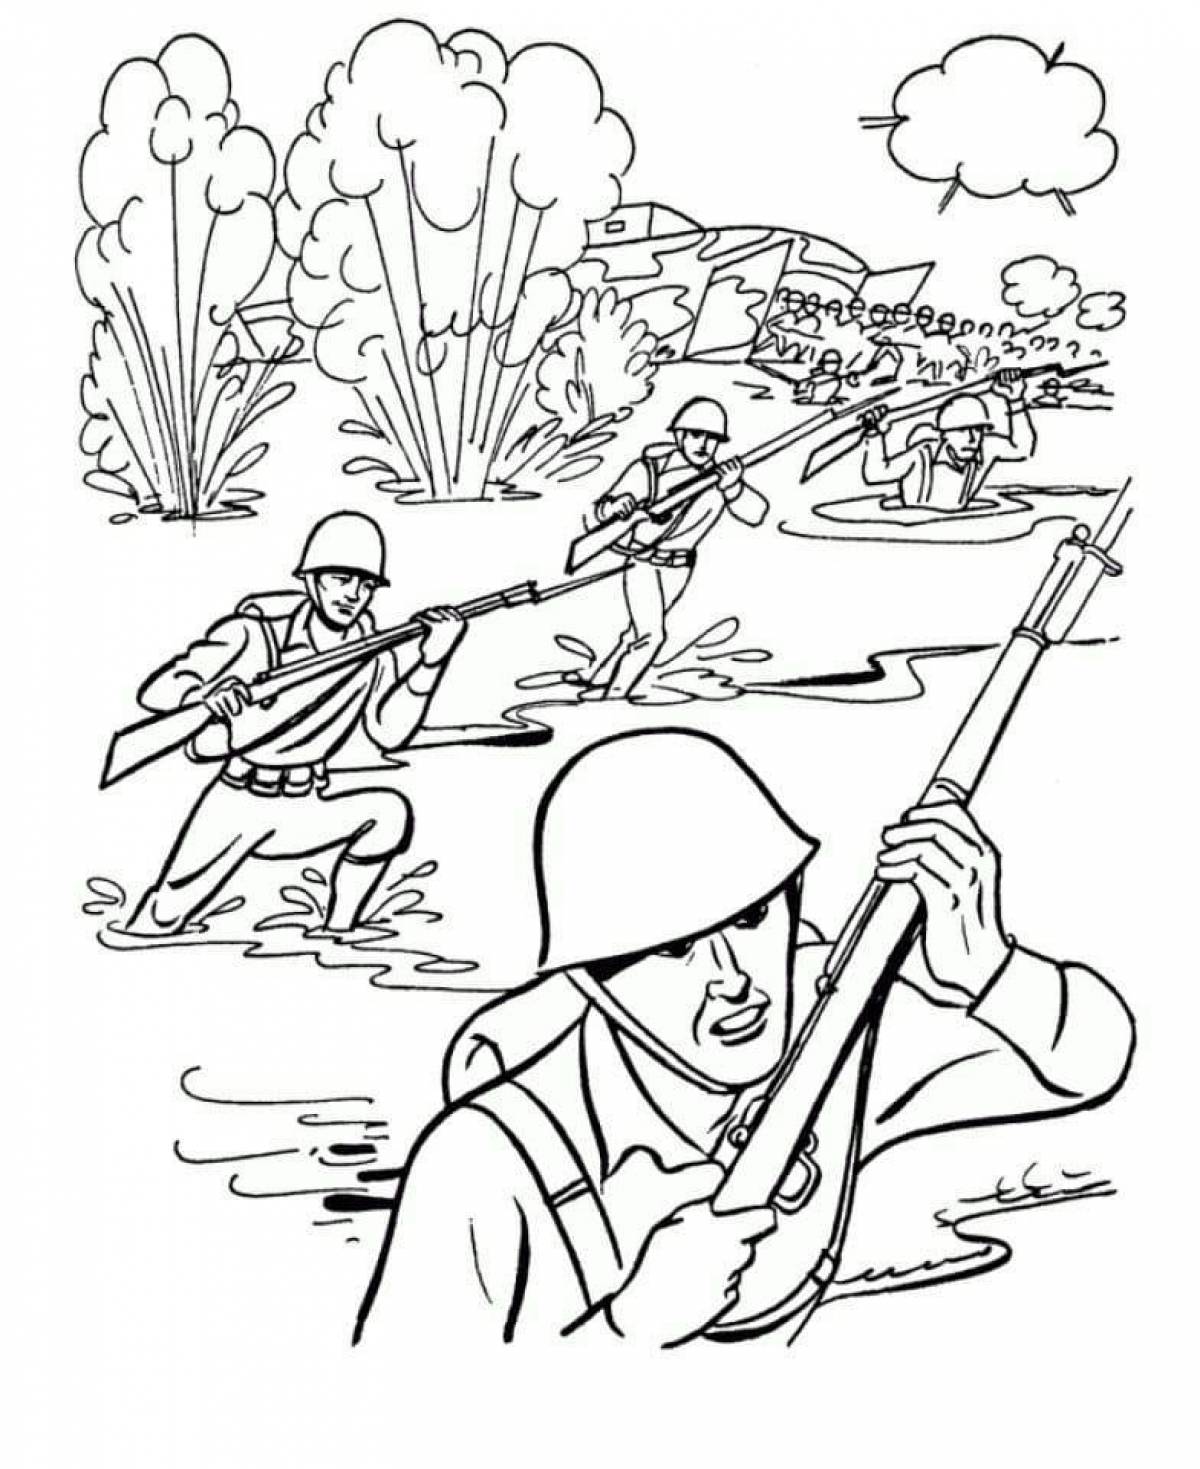 On a military theme for children #4